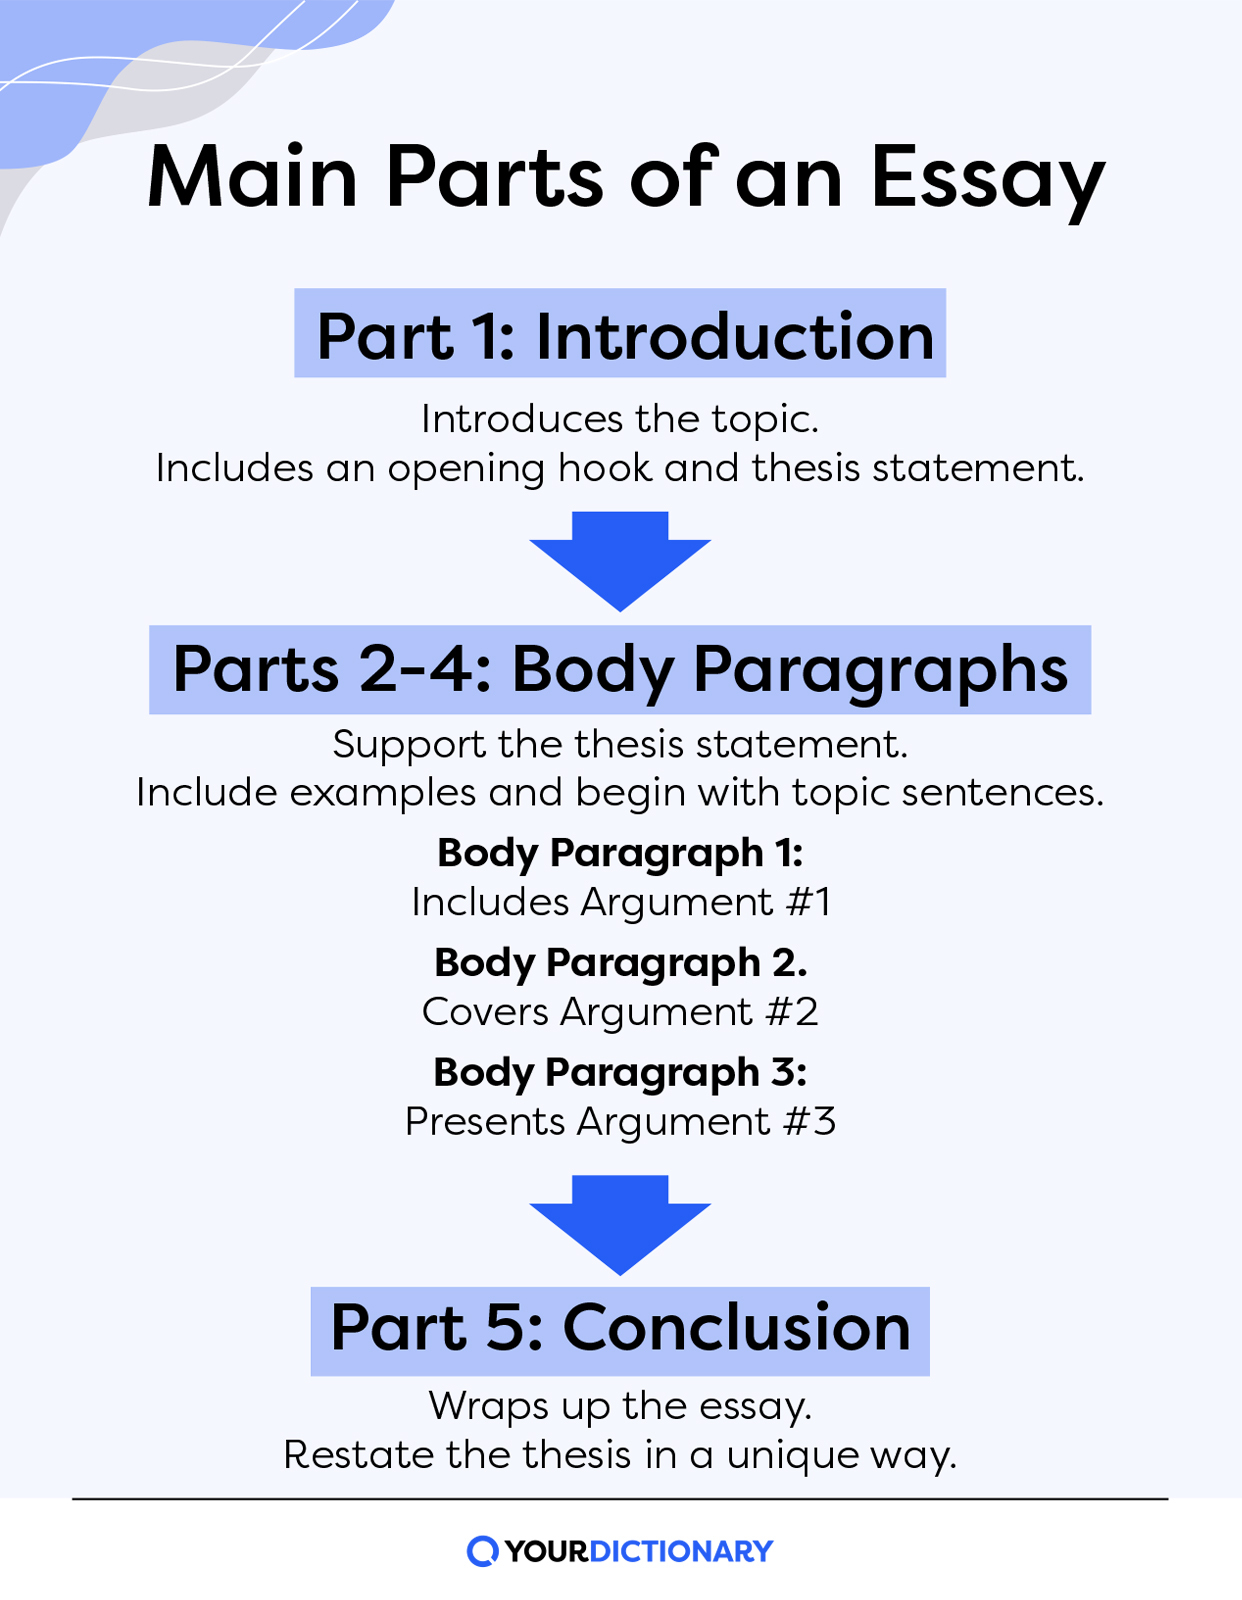 5 main parts of an essay with tips for writing them from the article